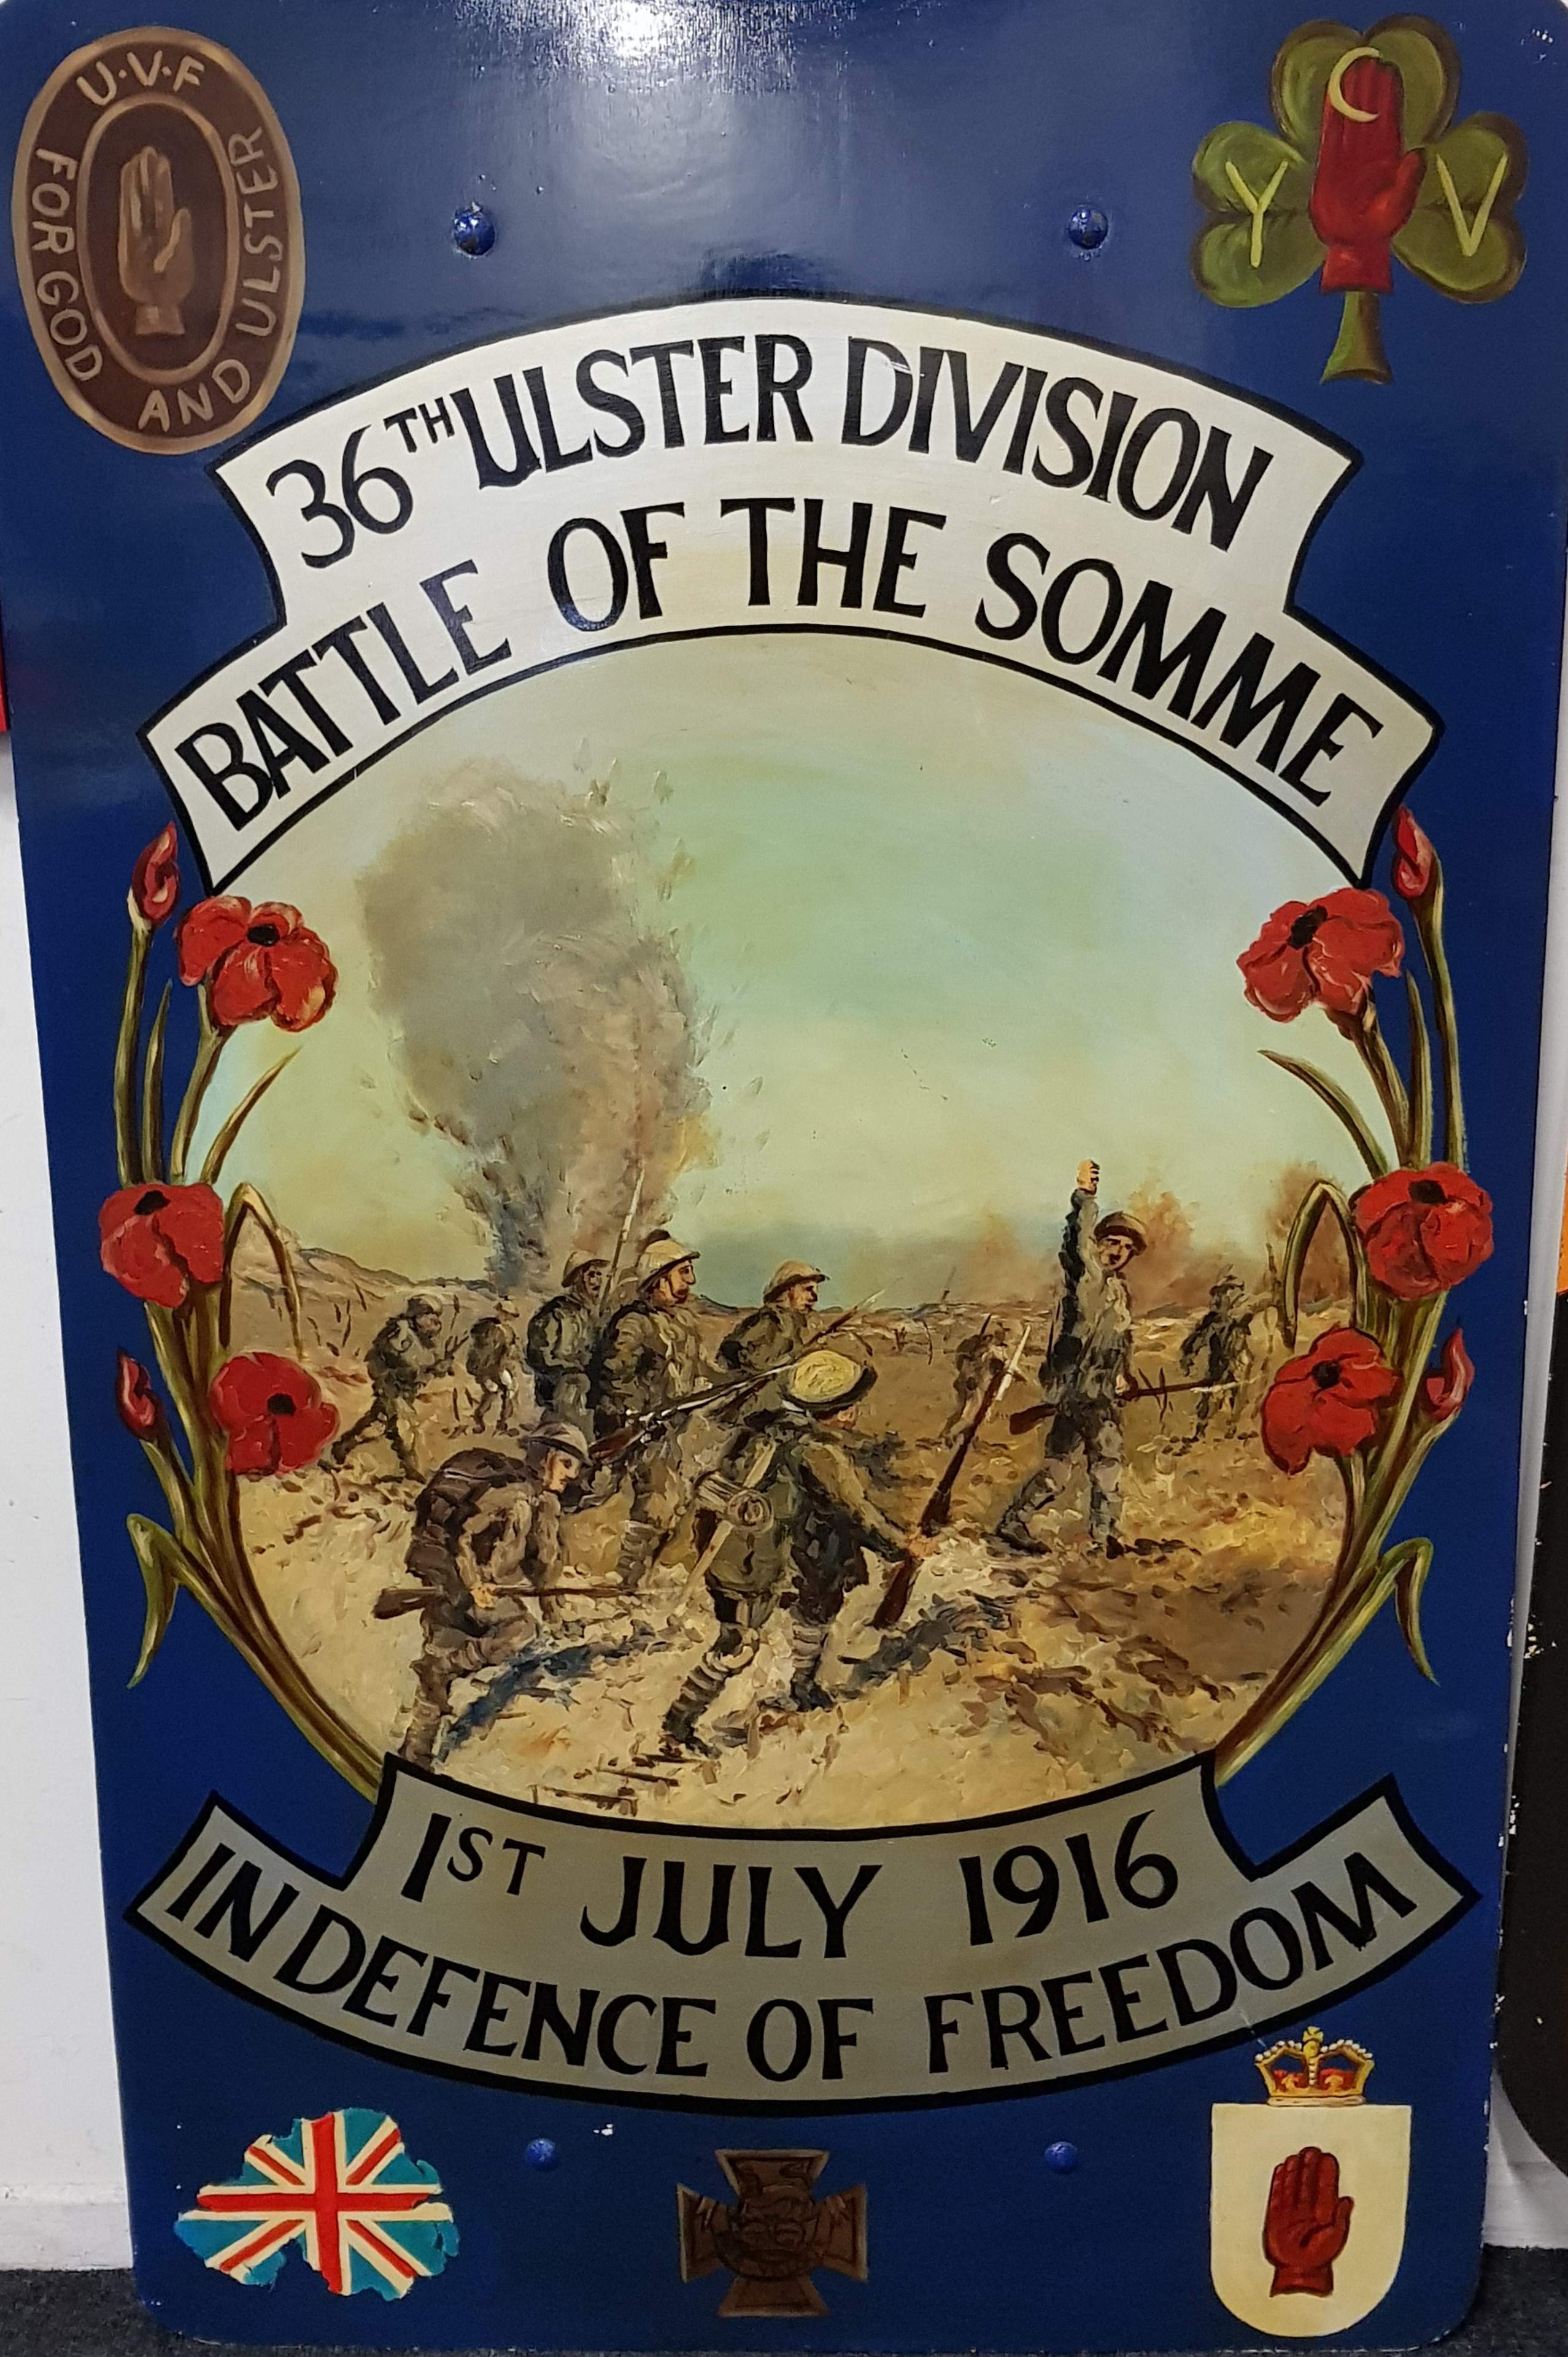 LARGE HAND PAINTED 36TH ULSTER DIVISION WOODEN PLAQUE DEPICTING THE ATTACK ON THE 1ST OF JULY 1916